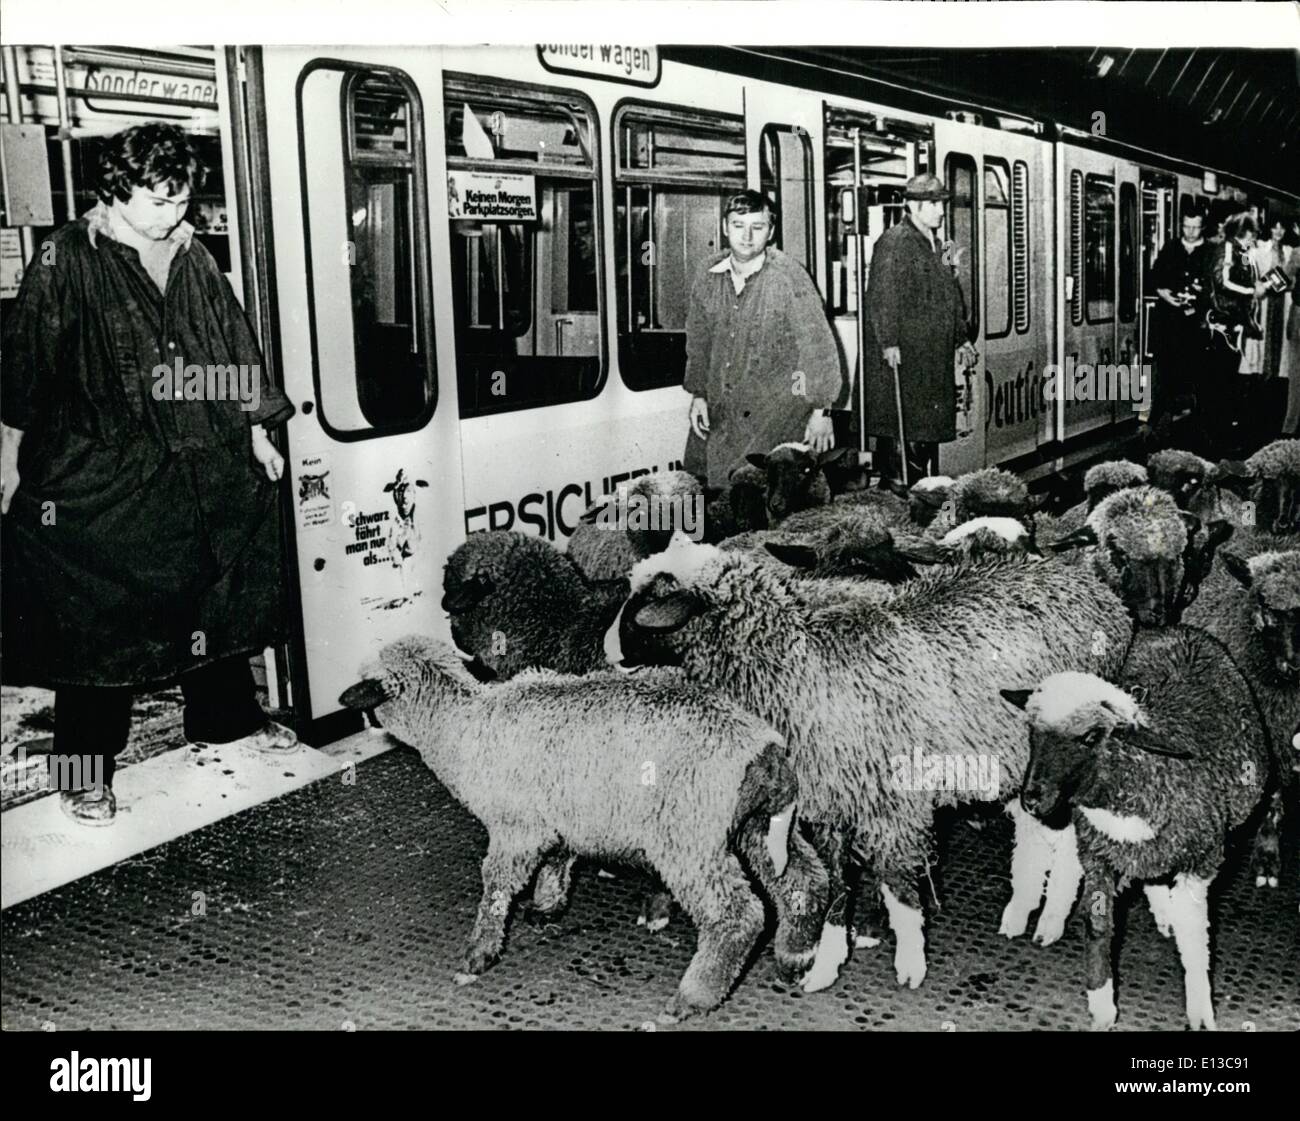 Mar. 02, 2012 - Bonn's ''Black Sheep'' The ''Black Sheep'' are rely the commuters into the German capital, who omit to pay their fare. As the city is losing 2 million marks yearly. The City authorities staged a demonstration of putting 20 black sheep on the sub-way, so as point out to their citizen the error of their ways. Stock Photo